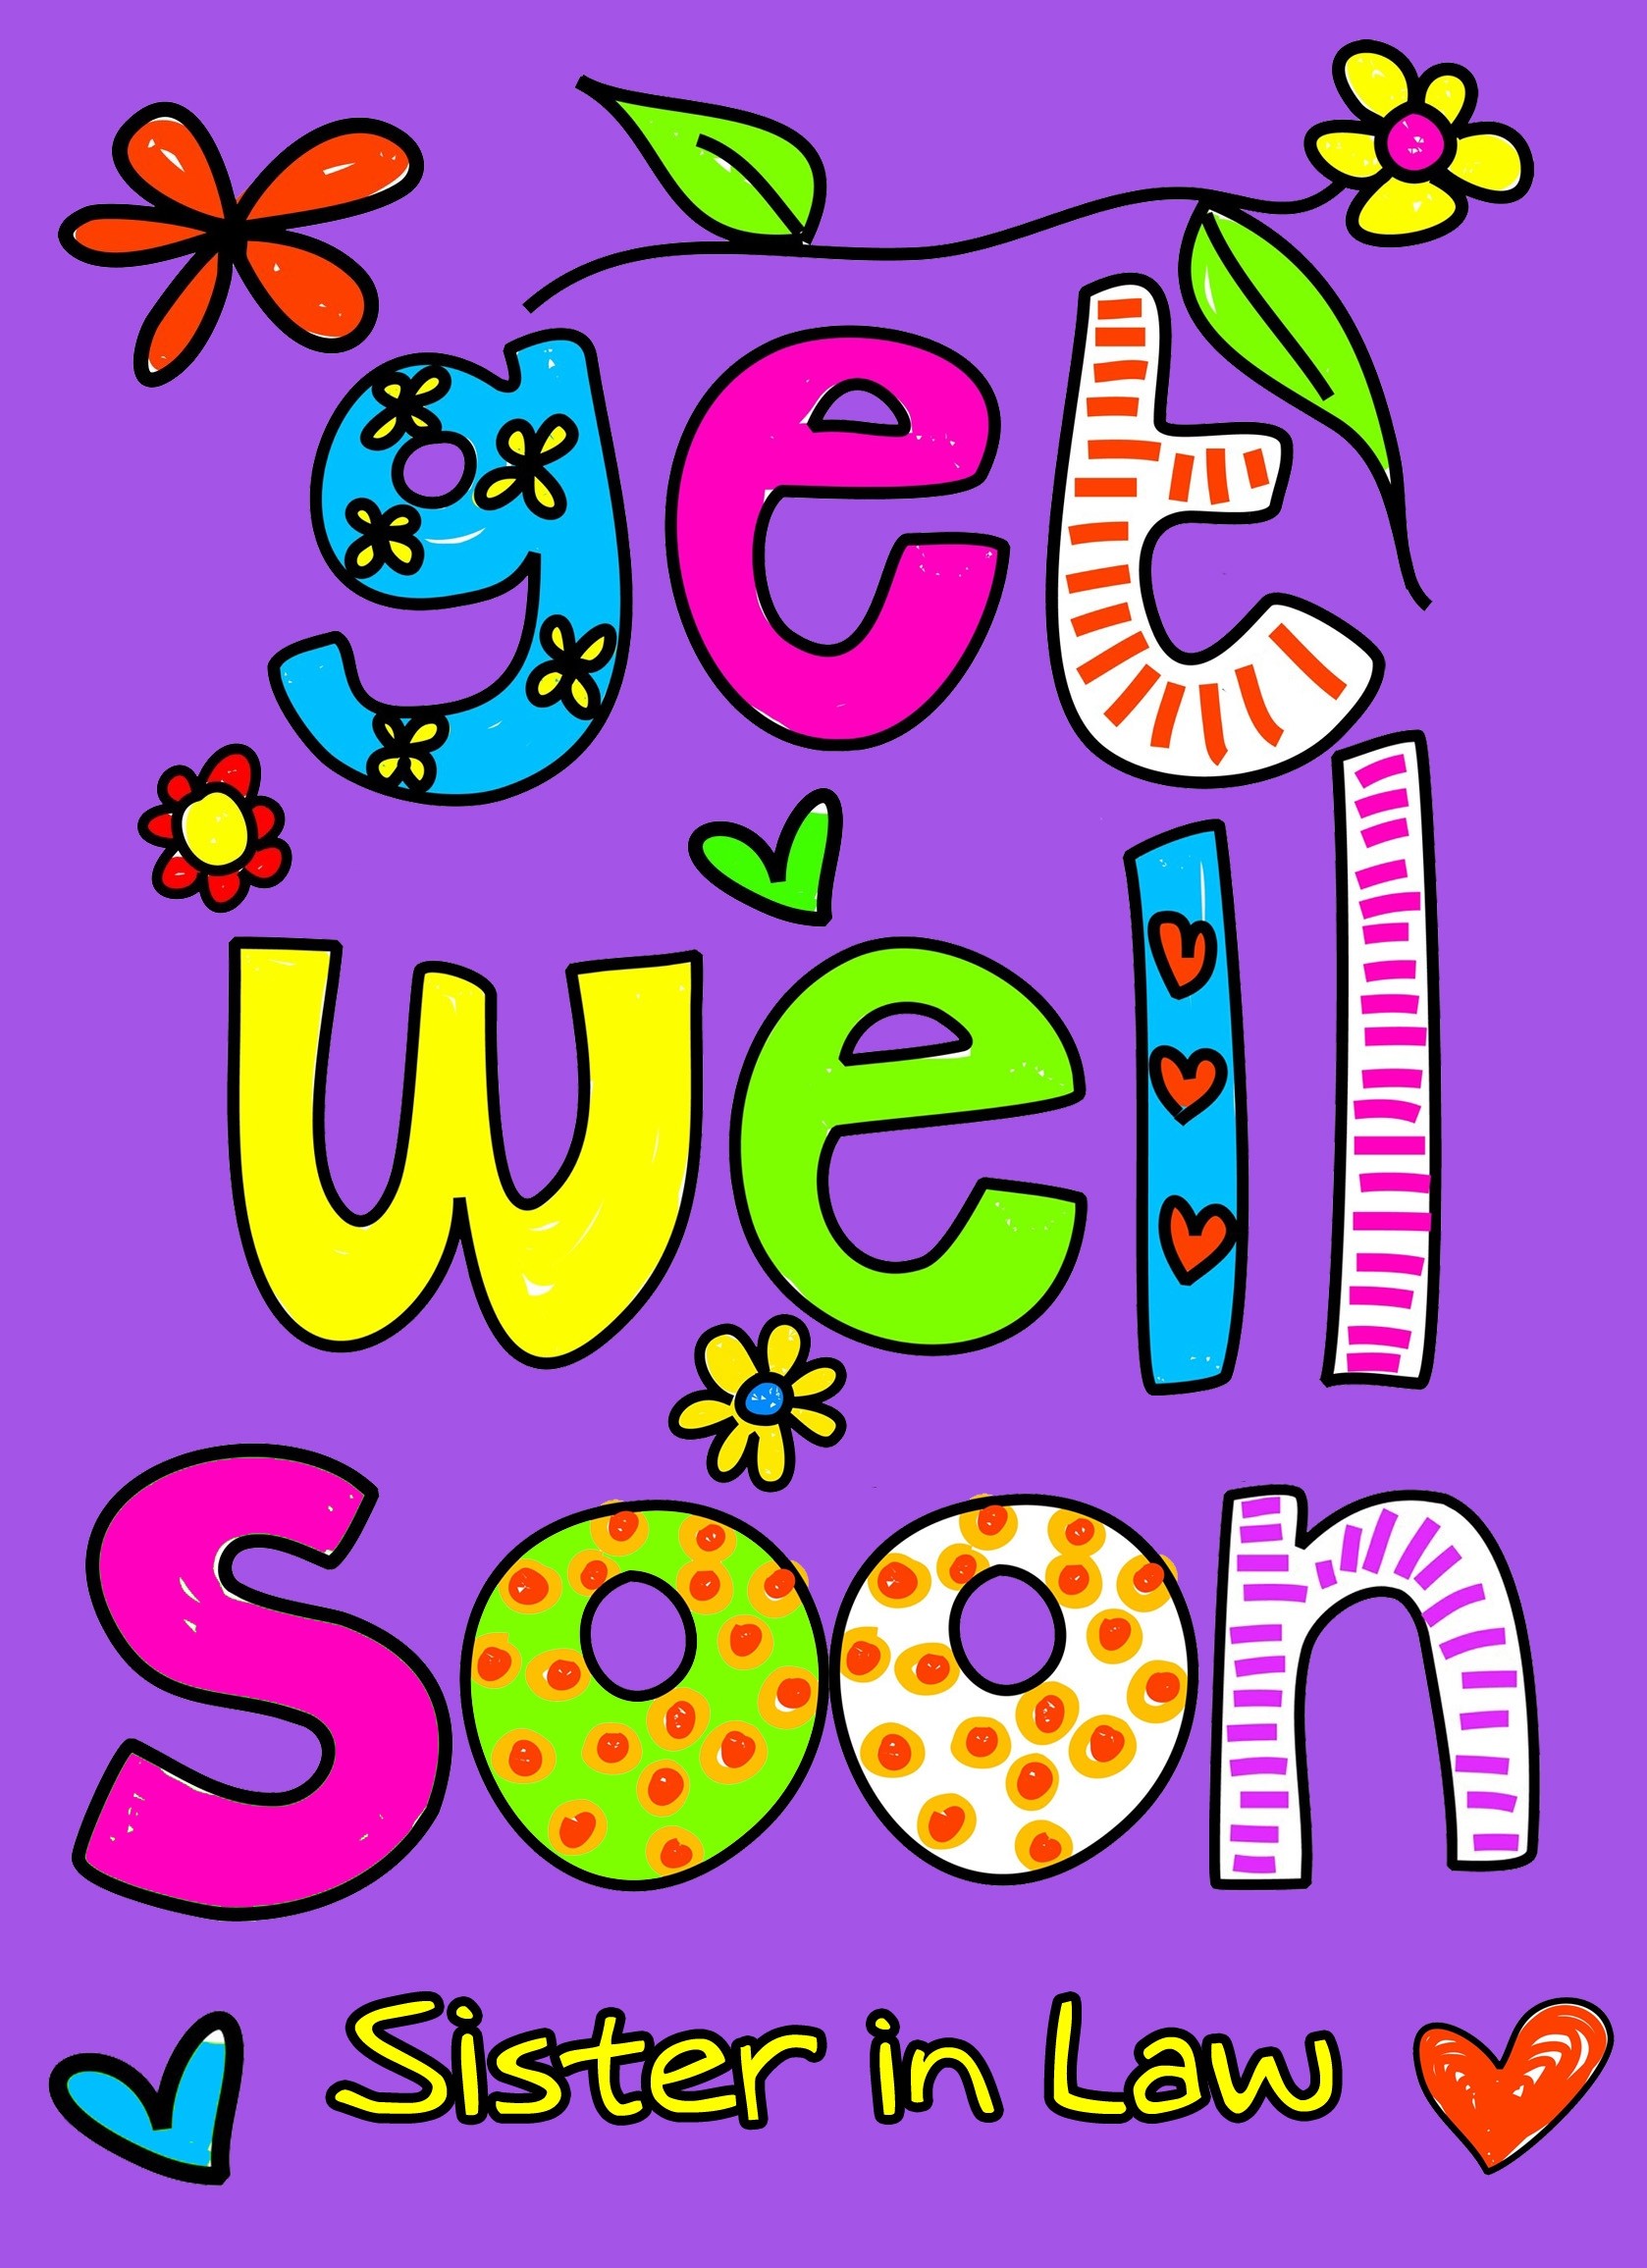 Get Well Soon 'Sister in Law' Greeting Card